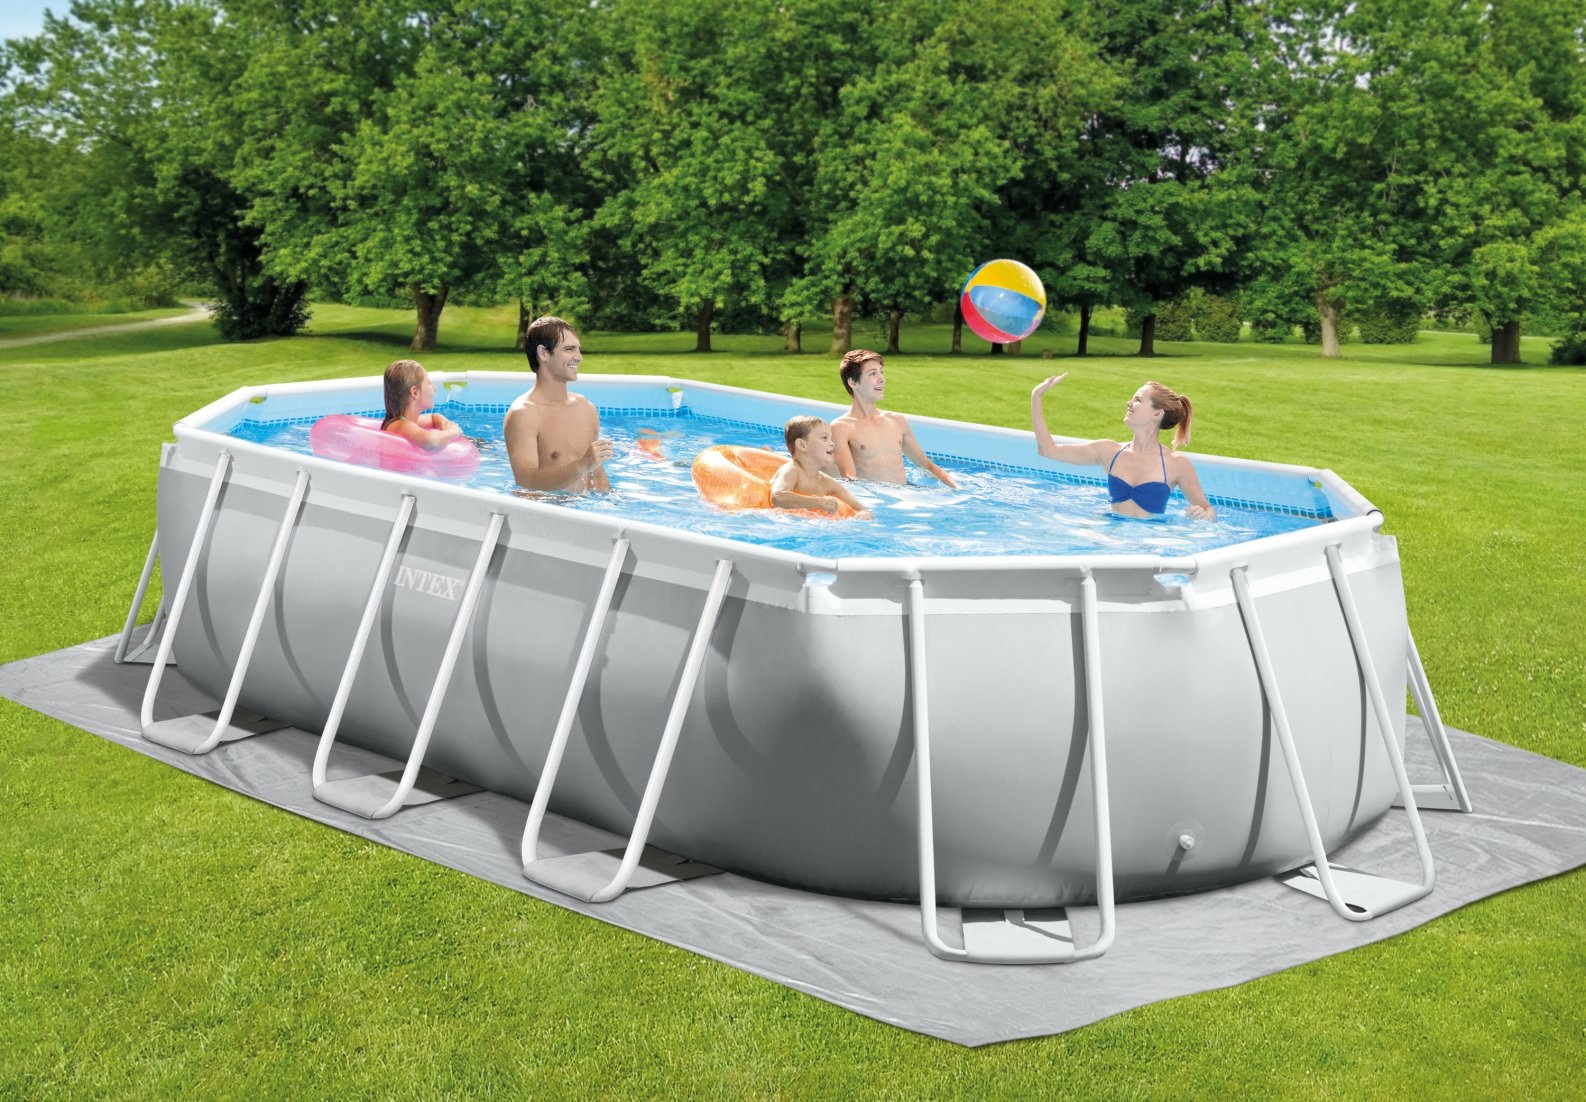 Oval Prism Frame Swimming Pool 16'6" x 9' x 48"